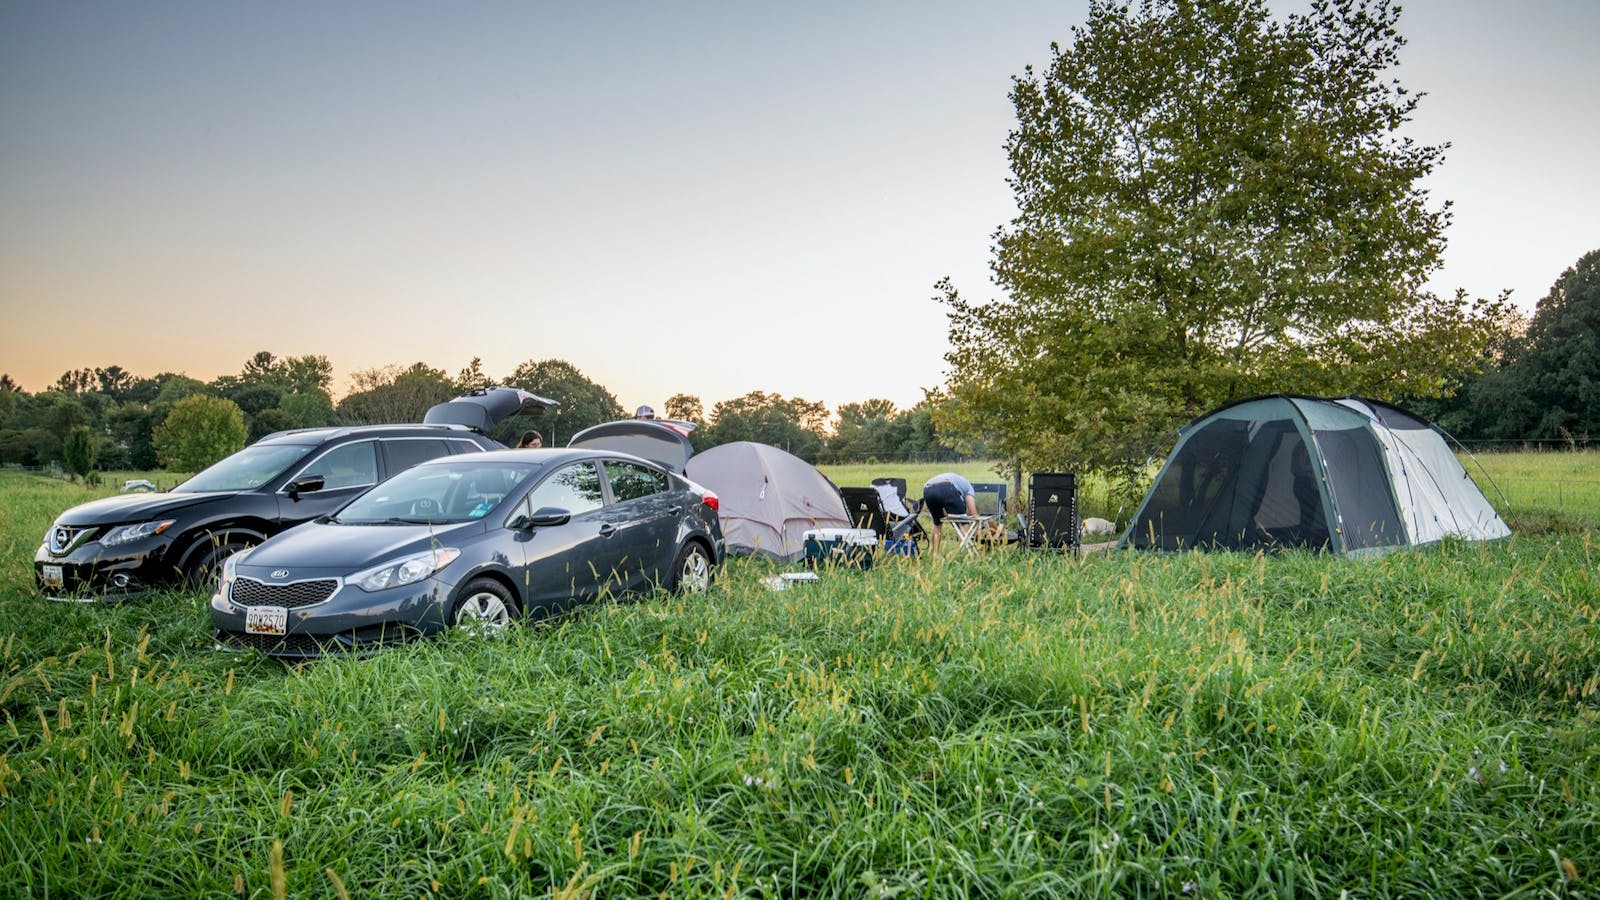 Hipcamp campers at a  site in Maryland last year. Photo: AP